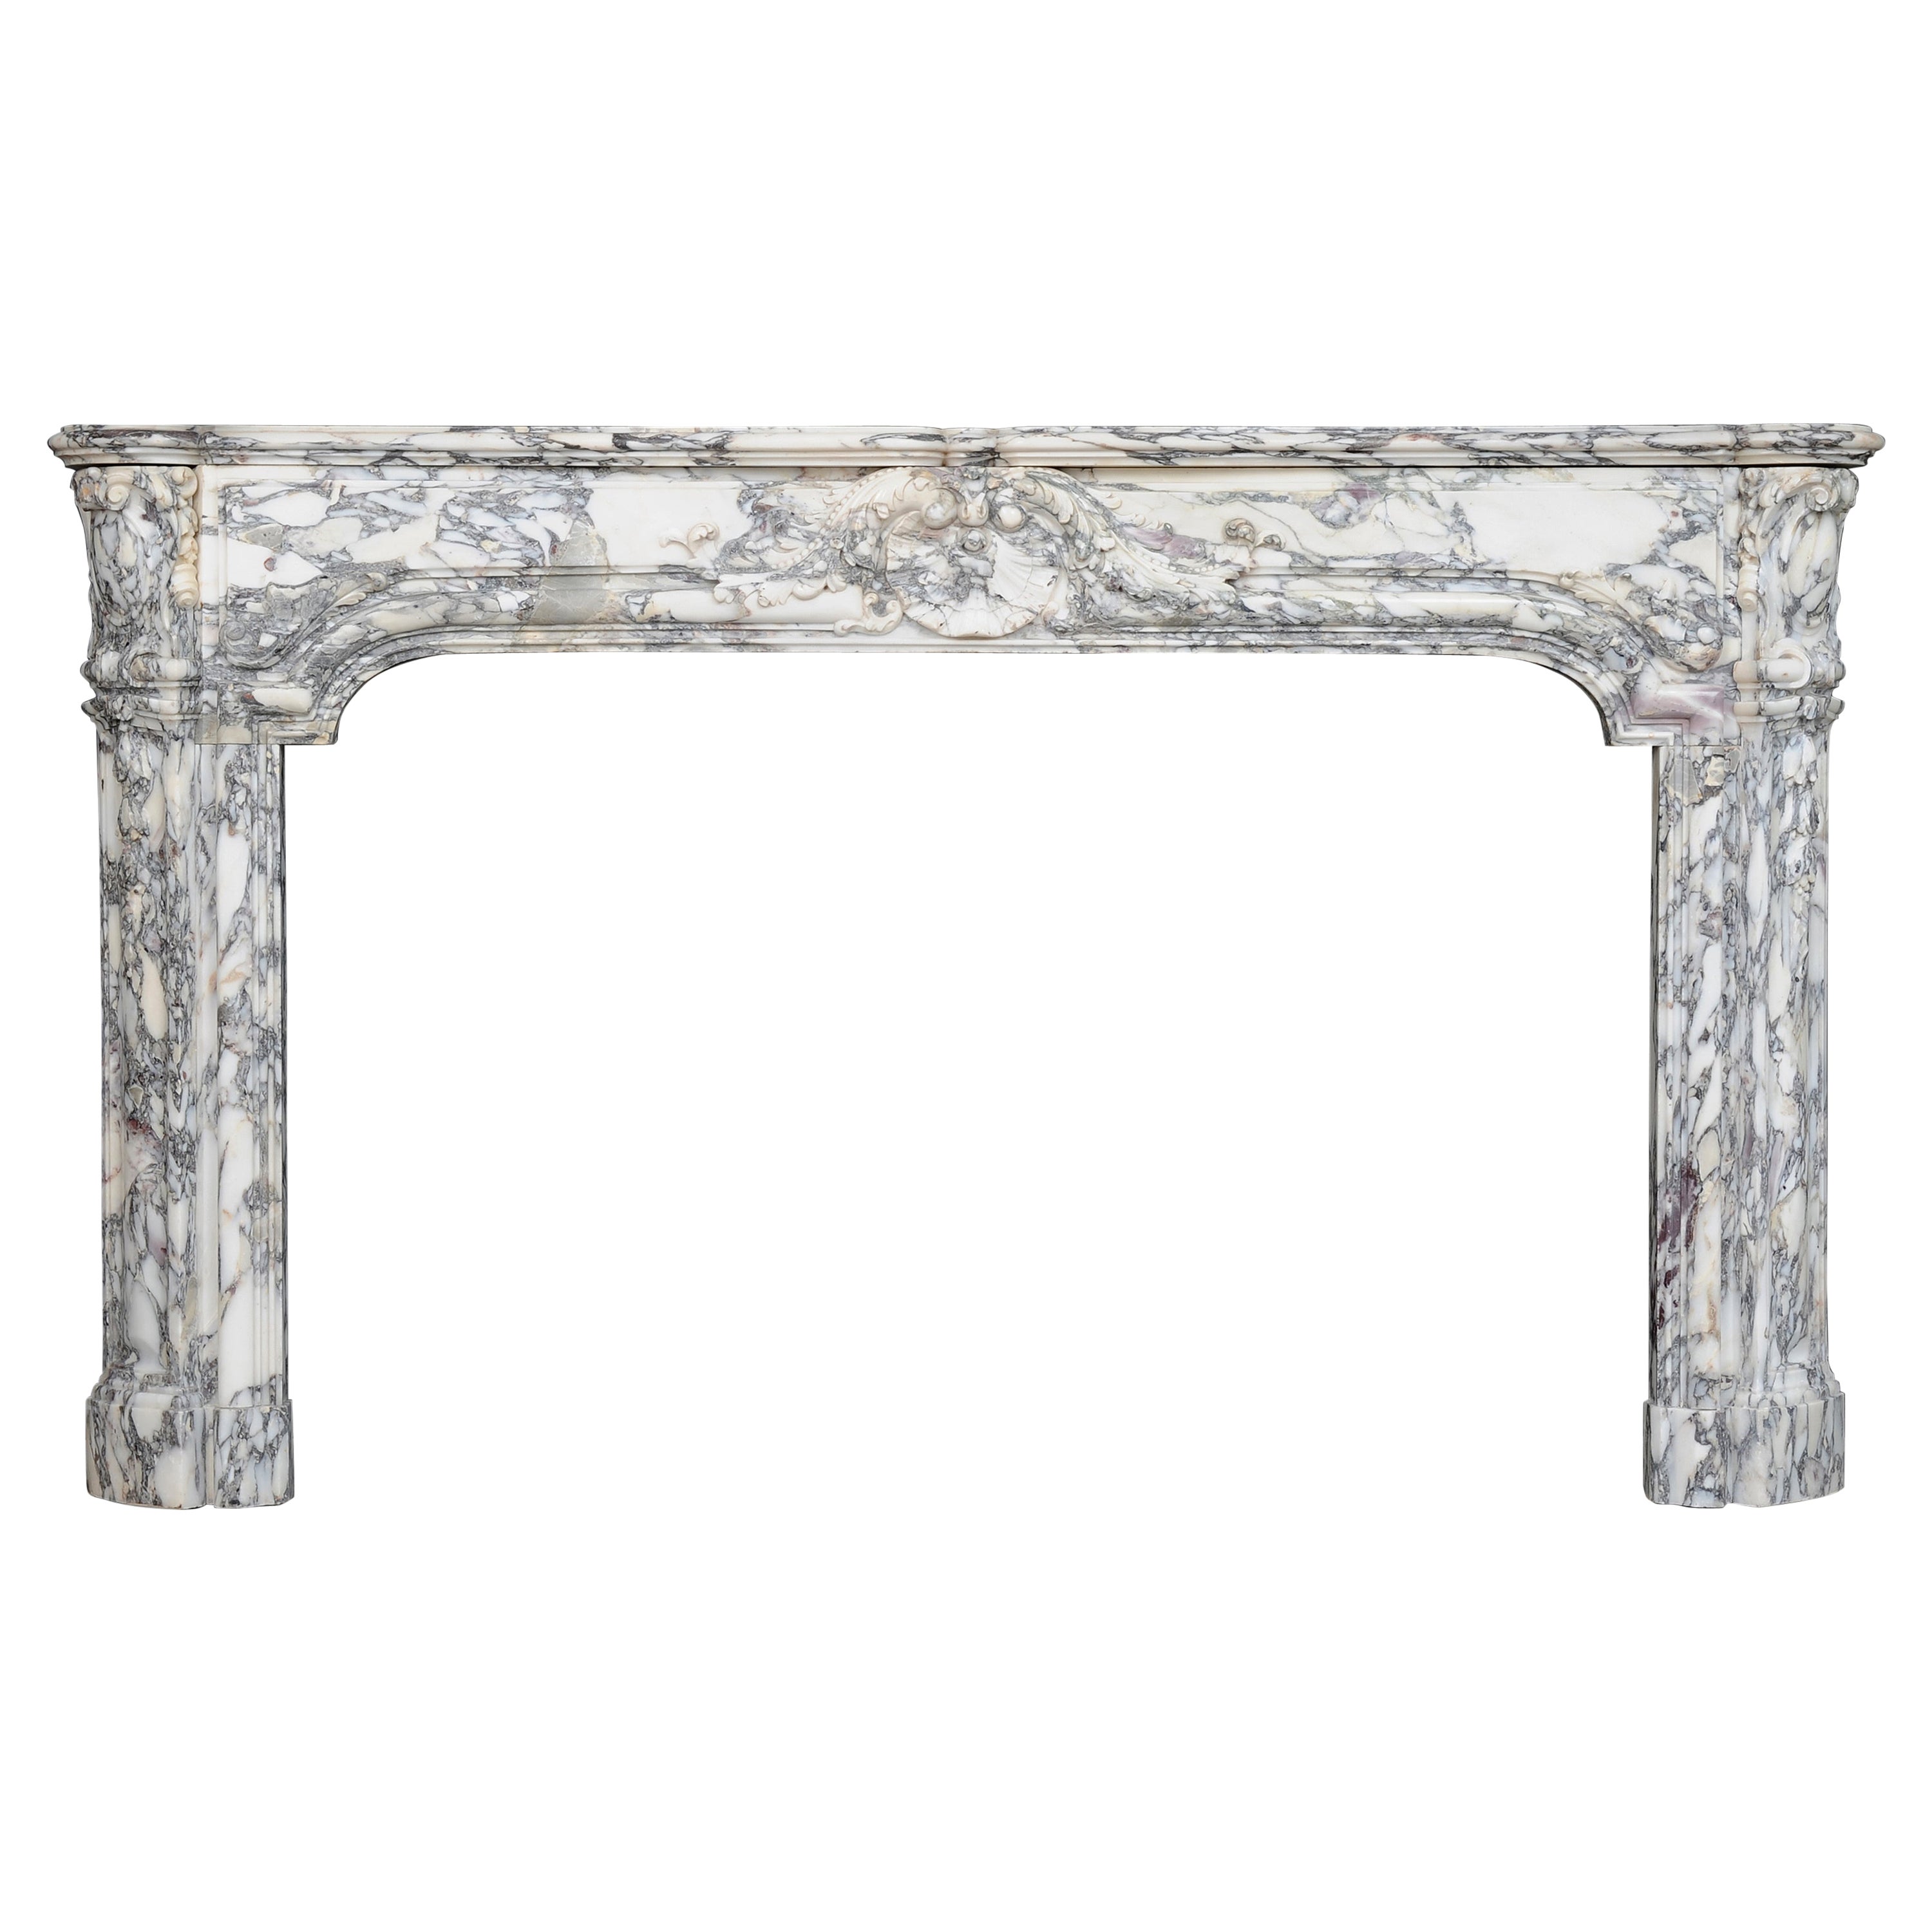 Beautiful Breche Marble Fireplace Mantel, Free Shipping For Sale